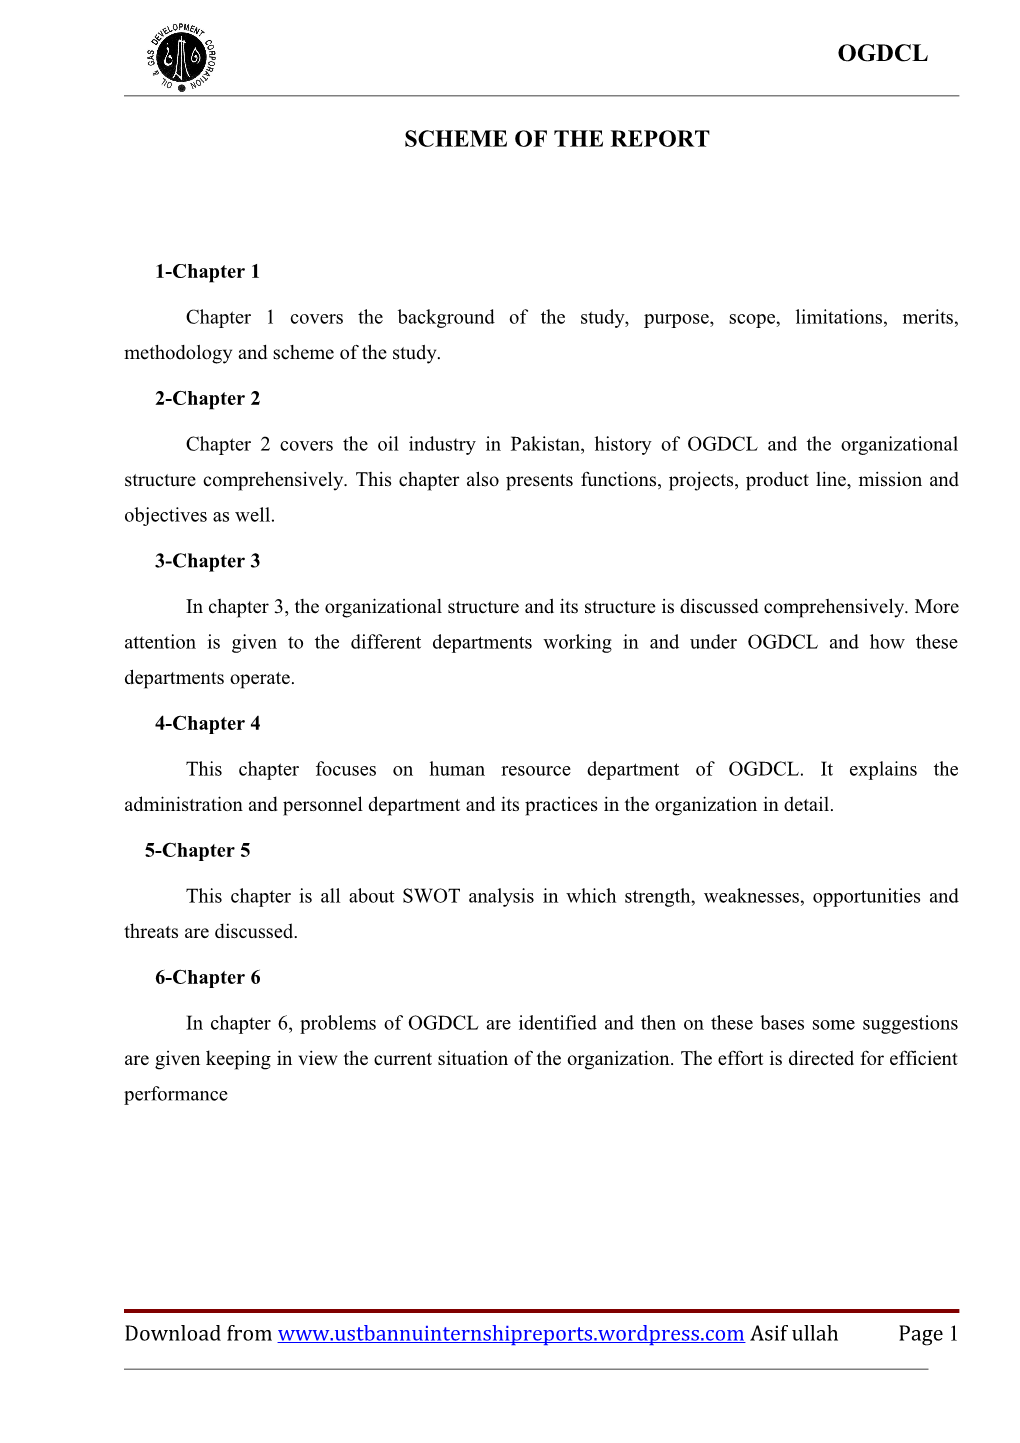 Scheme of the Report